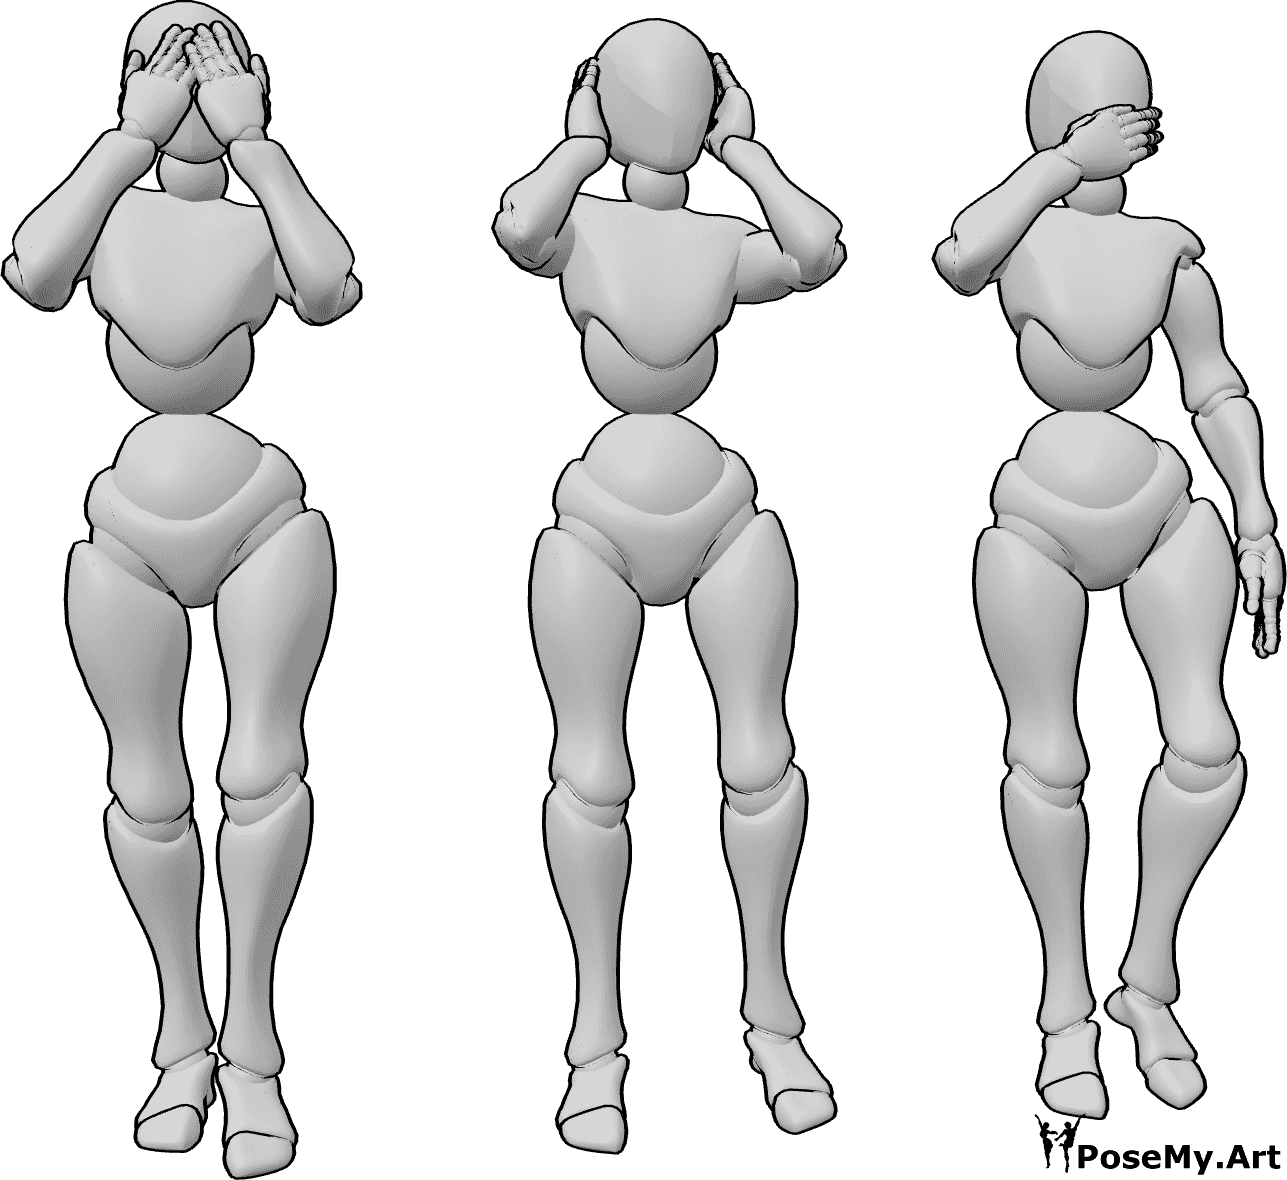 Pose Reference- Three females standing pose - Three females are standing and posing; 